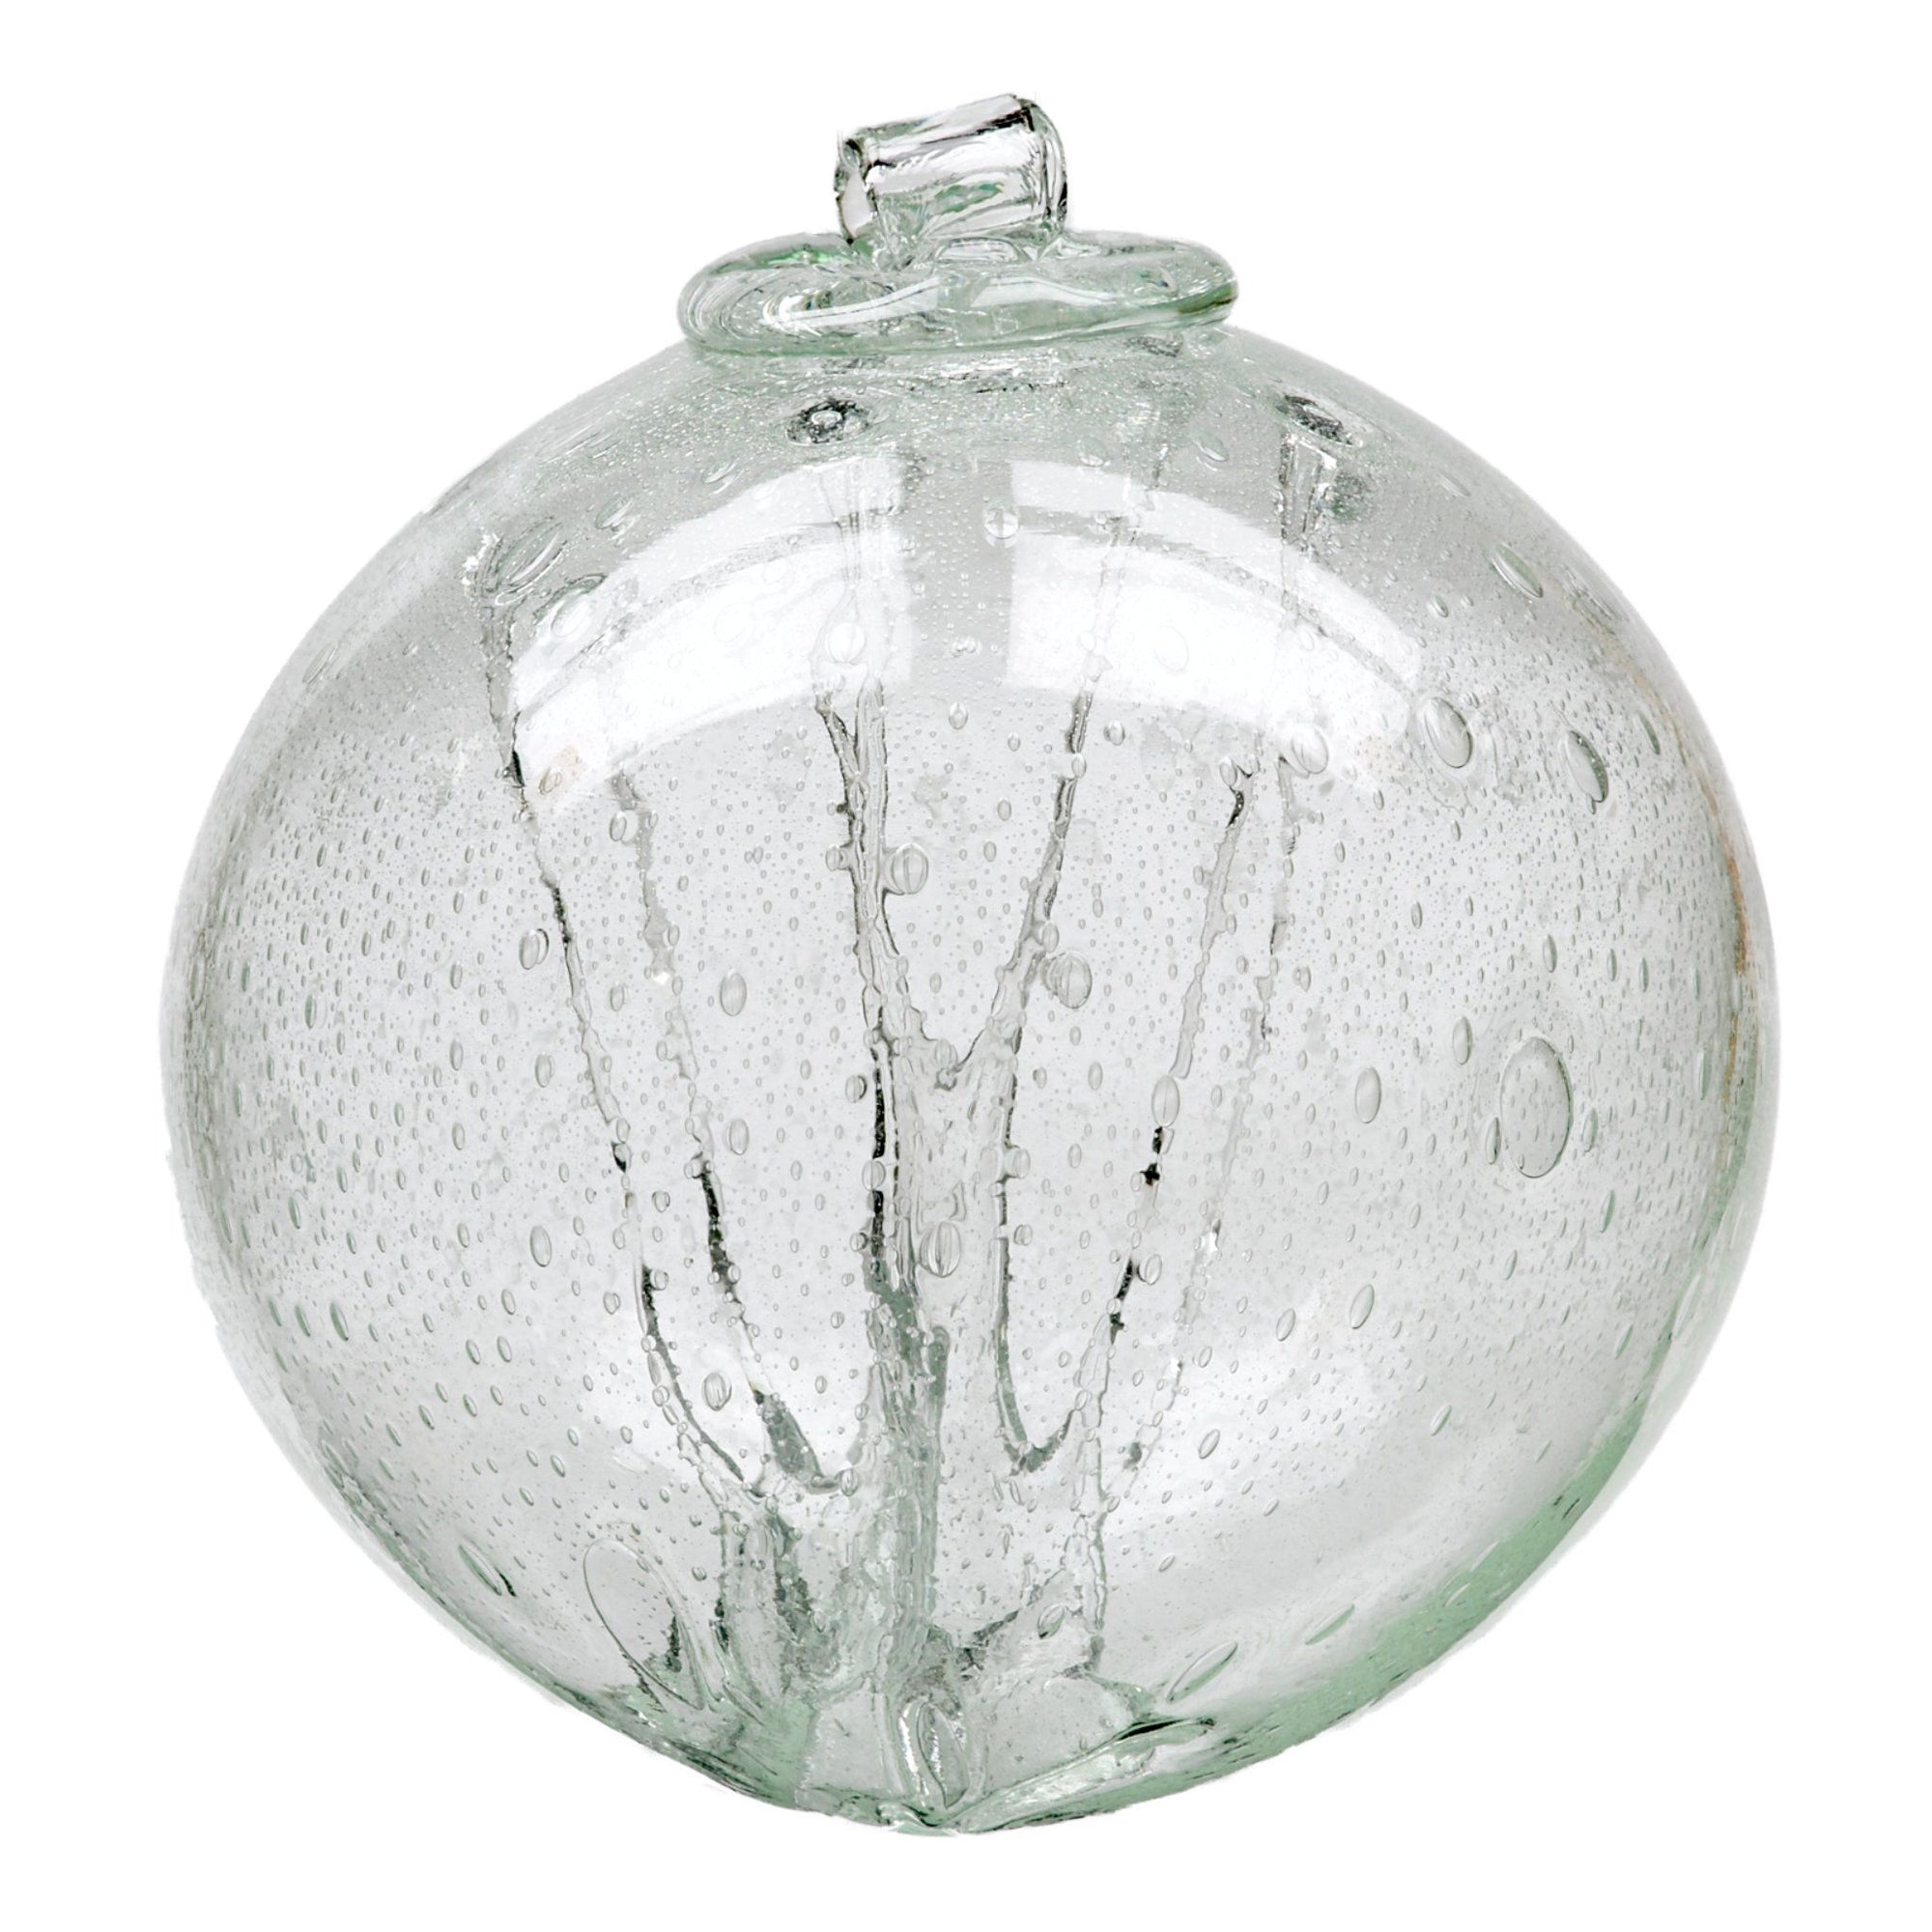 Olde English Witch Ball | Clear hand-blown Art Glass Ornament